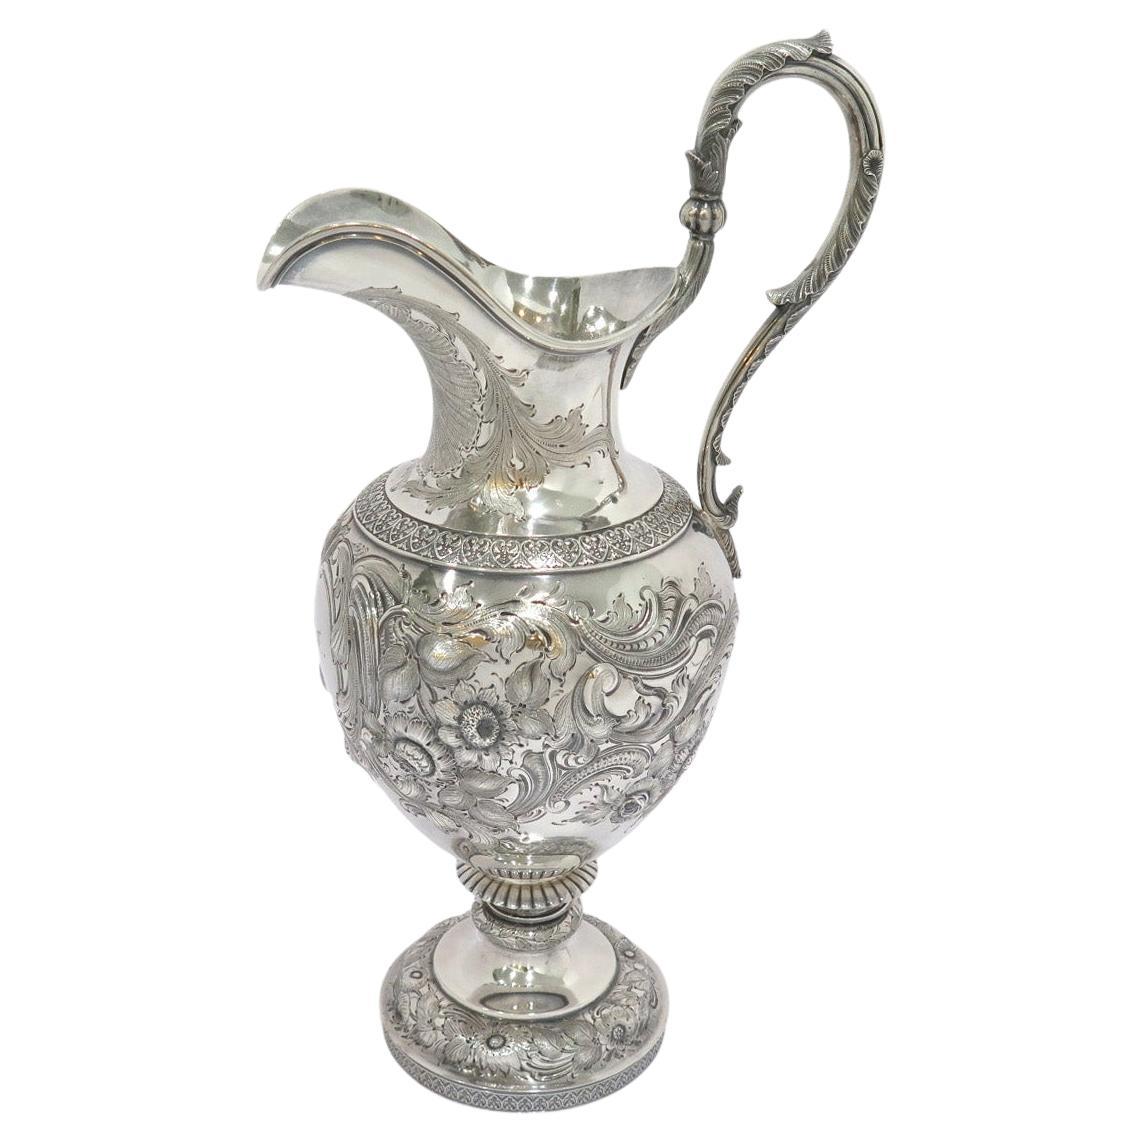 17.75 in - Coin Silver Ball, Tompkins & Black Antique 1839-1851 Repousse Pitcher For Sale